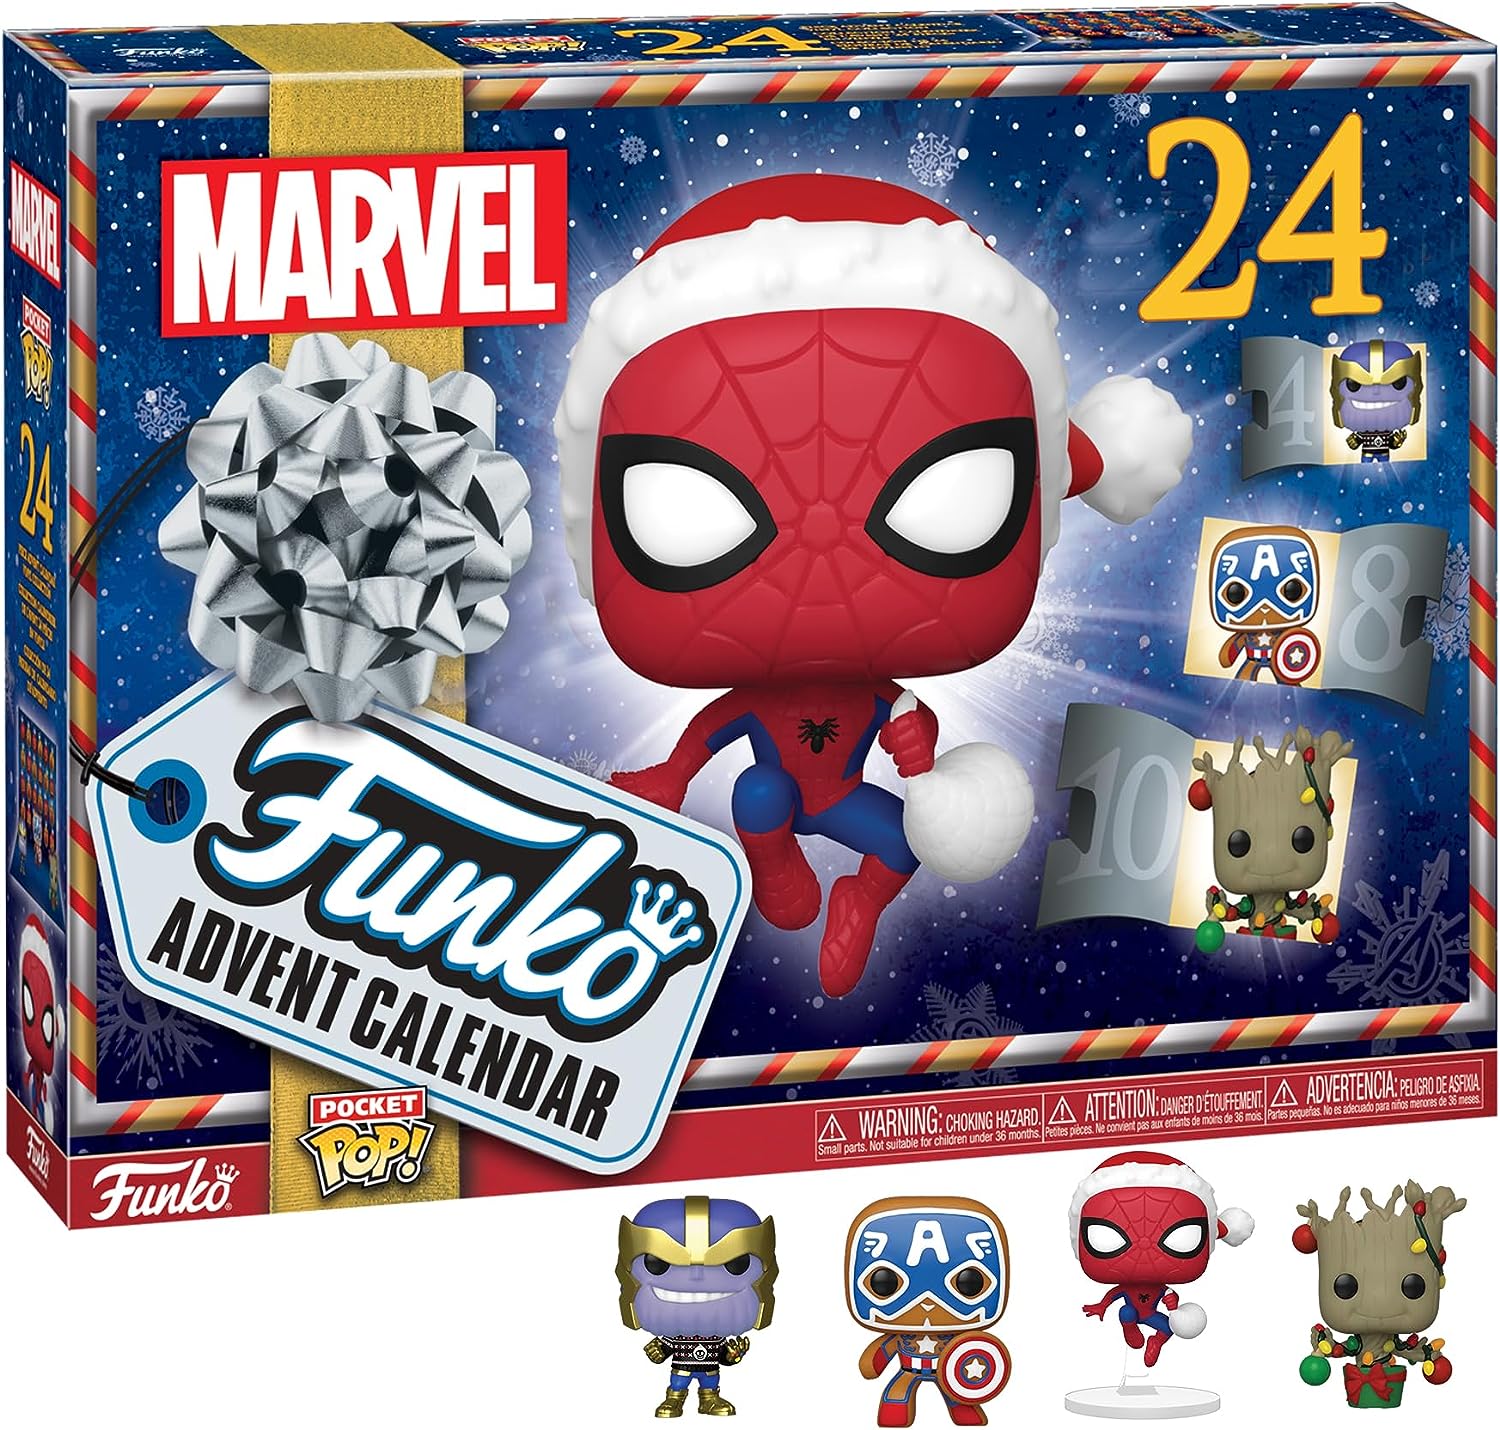 Funko Advent Calendar: Marvel Holiday - Groot - Marvel Comics - 24 Days of Surprise - Collectable Vinyl Mini Figure - Mystery Box - Gift Idea - Holidays for Christmas